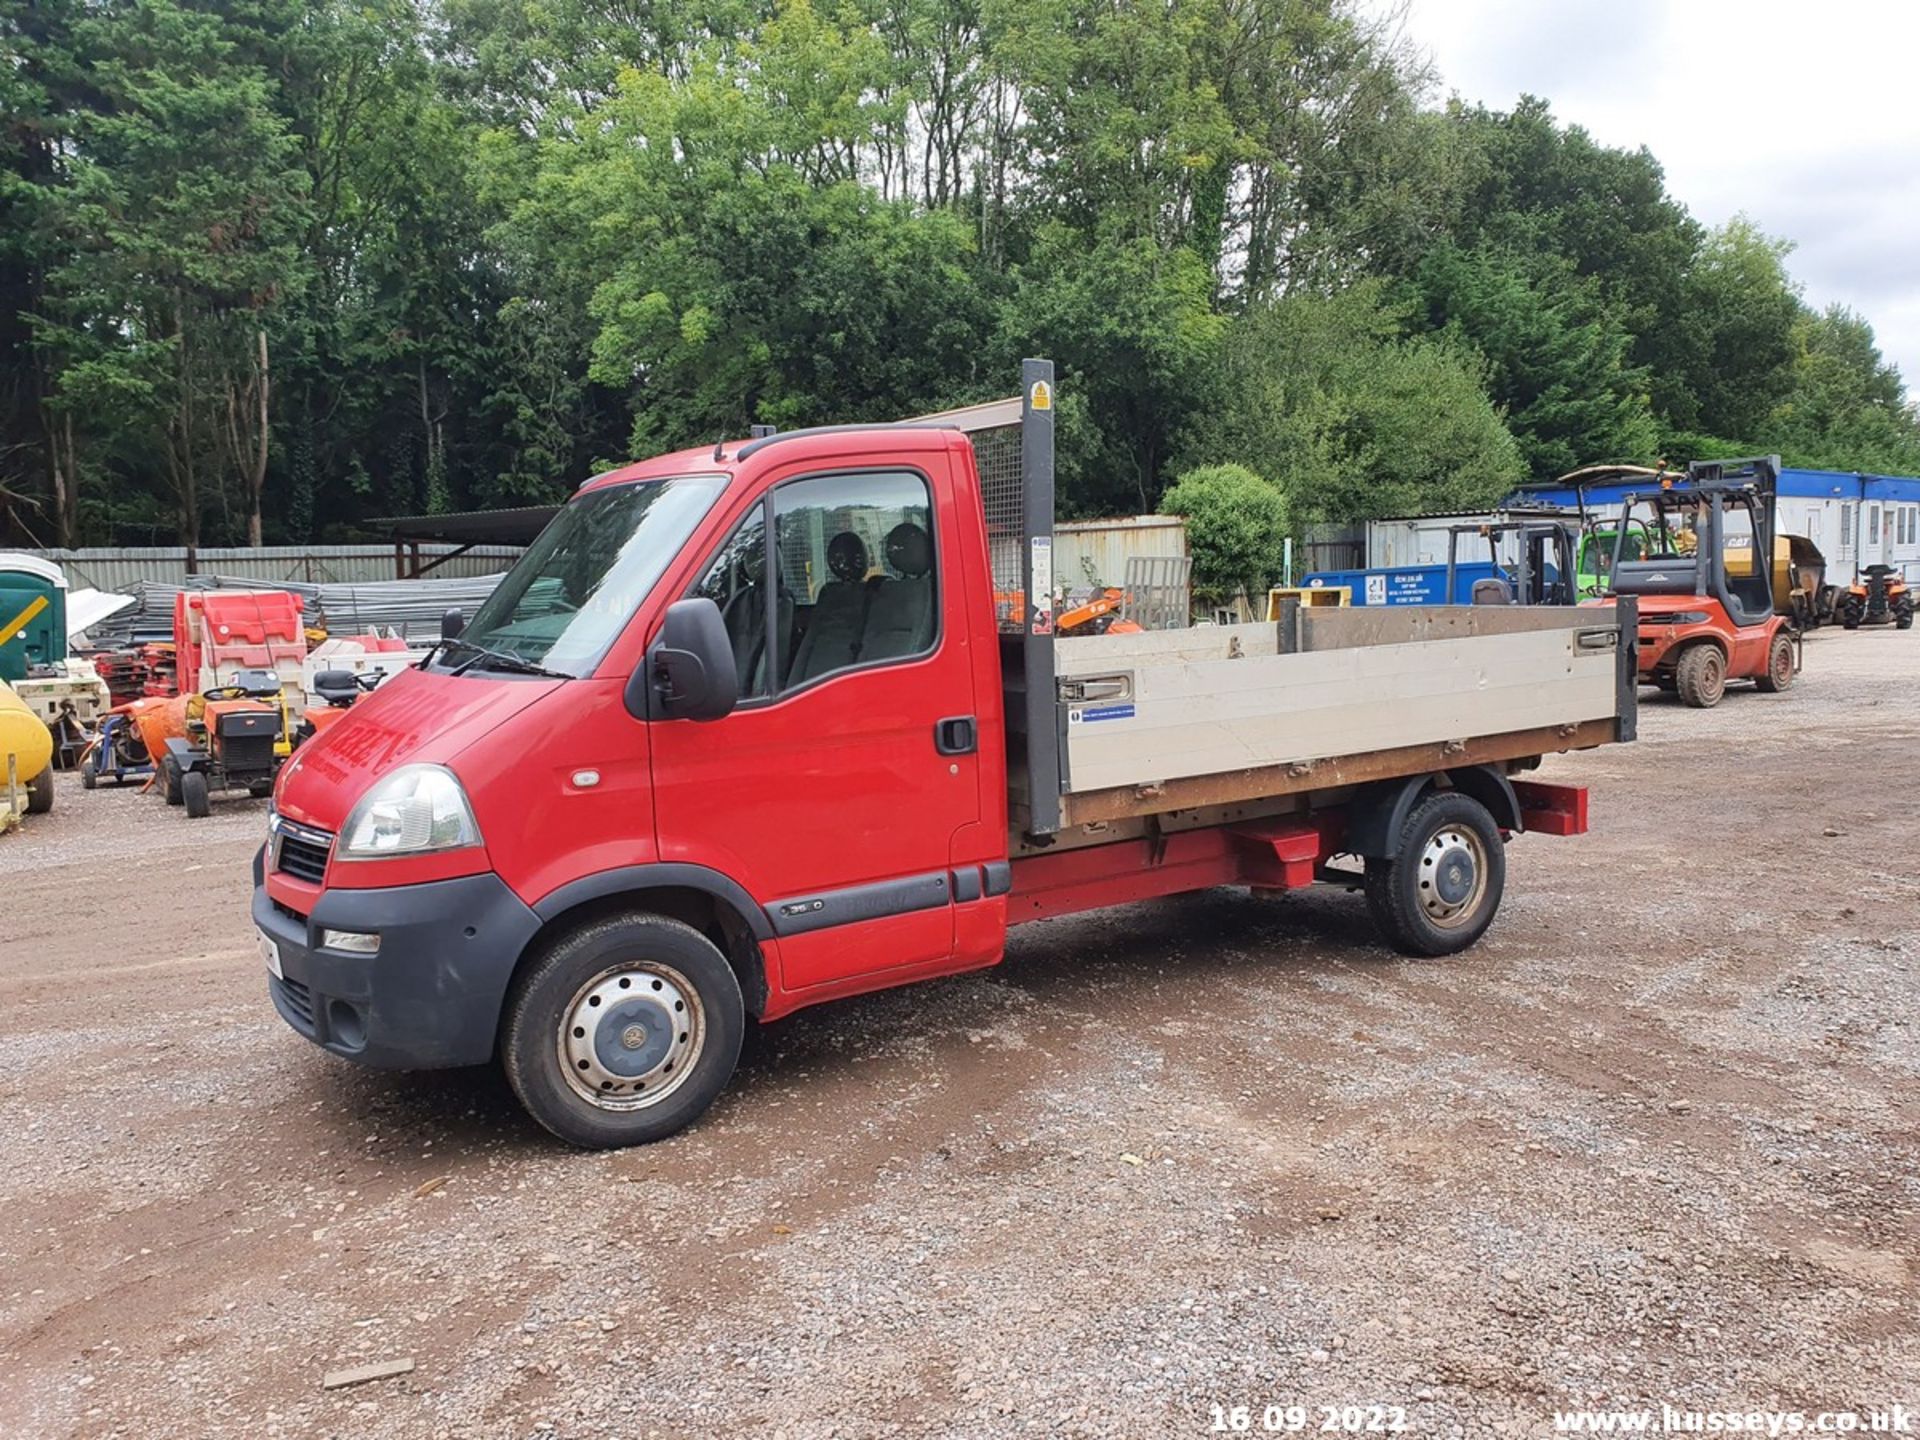 11/11 VAUXHALL MOVANO 3500 CDTI MWB - 2464cc 2dr Tipper (Red, 52k) - Image 17 of 44